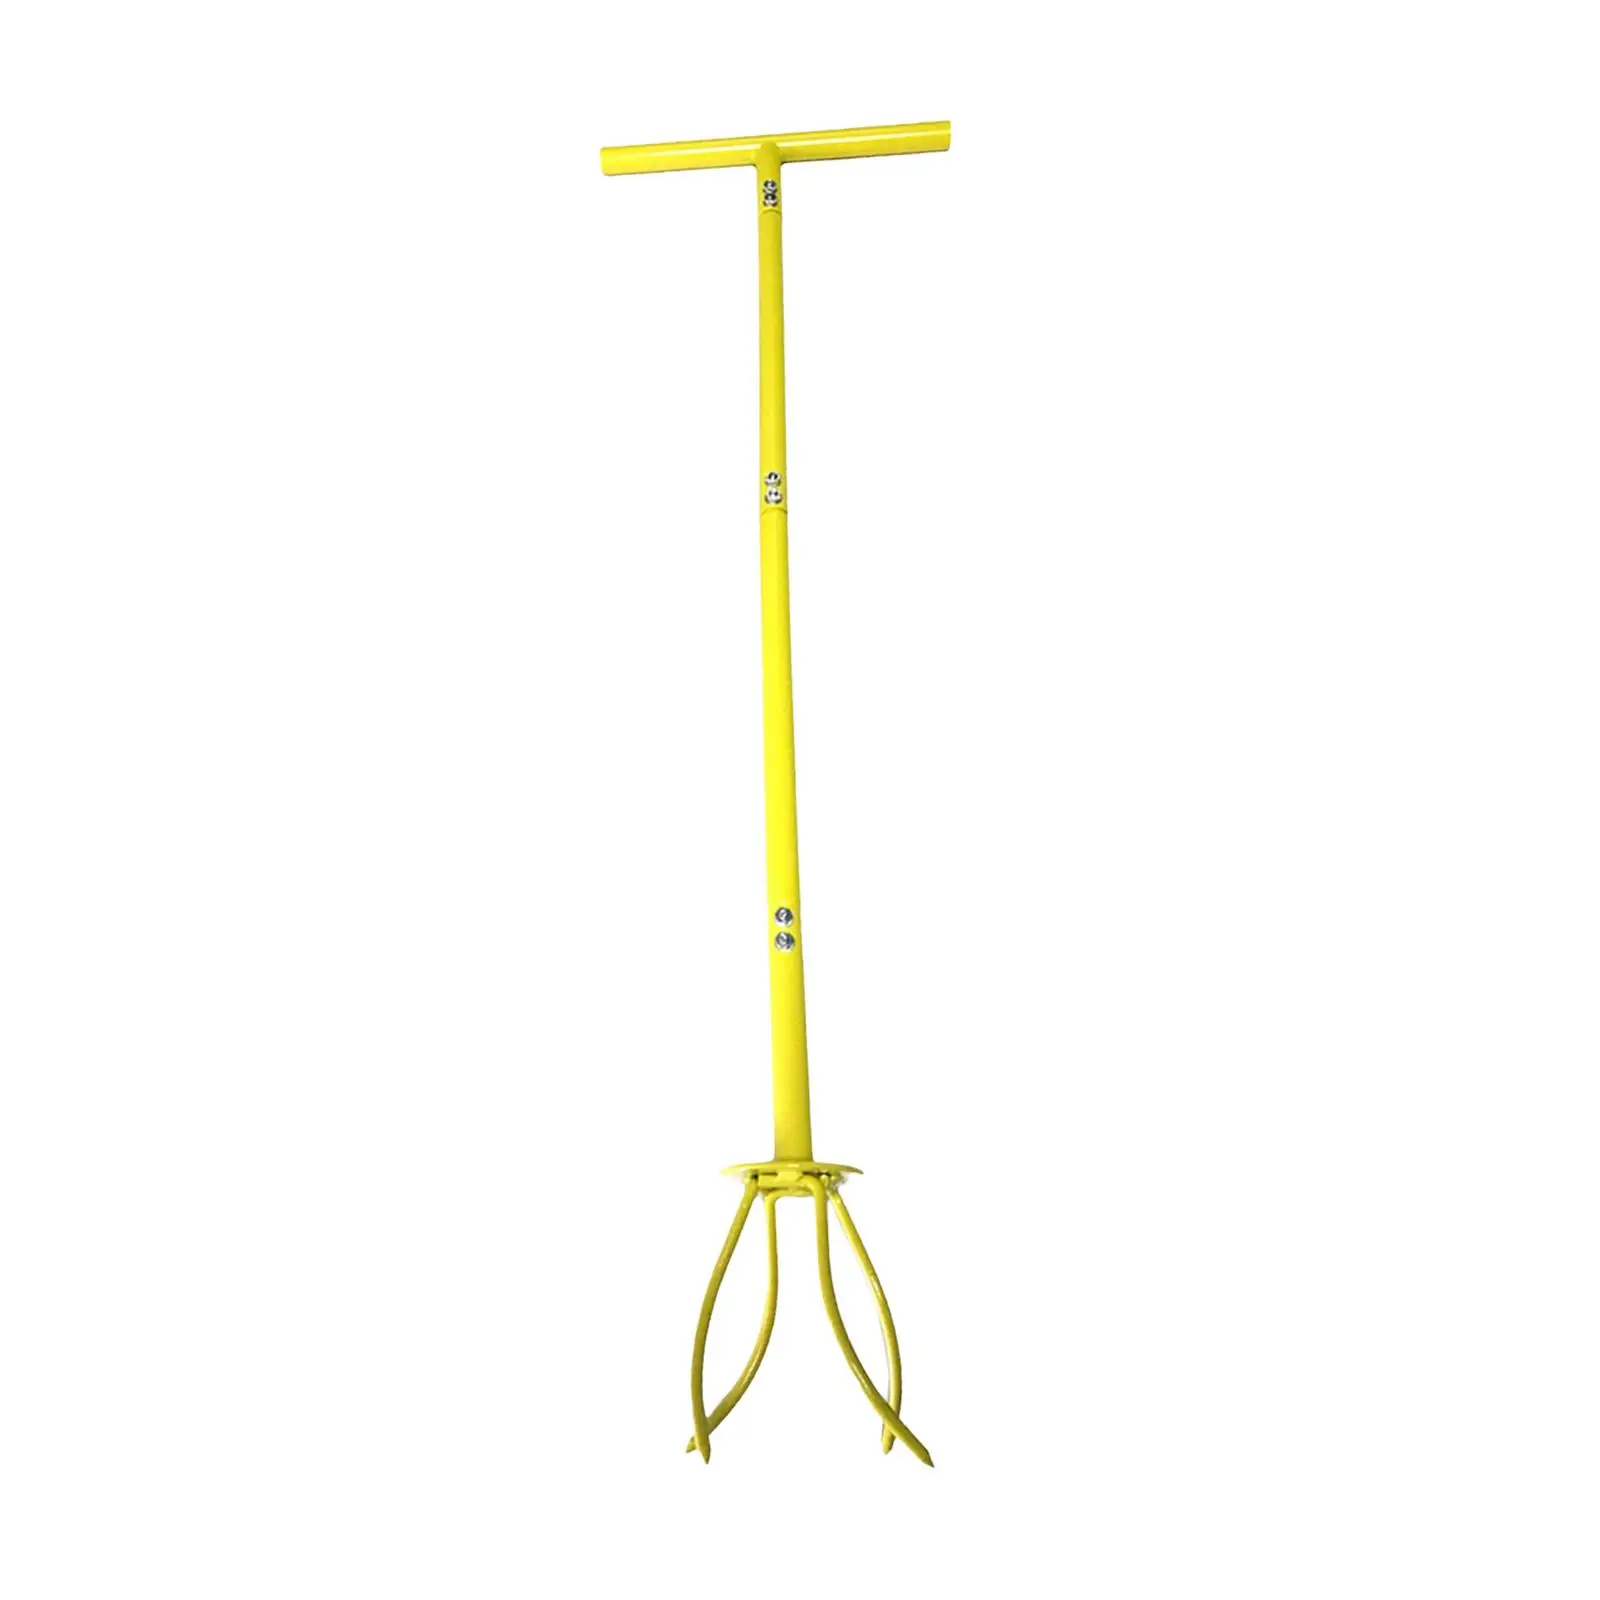 Manual Hand Tiller for Cultivate, Loosen, Aerate Rust Resistant Agriculture Farmer Tool Twist Tiller Comfortable Handle